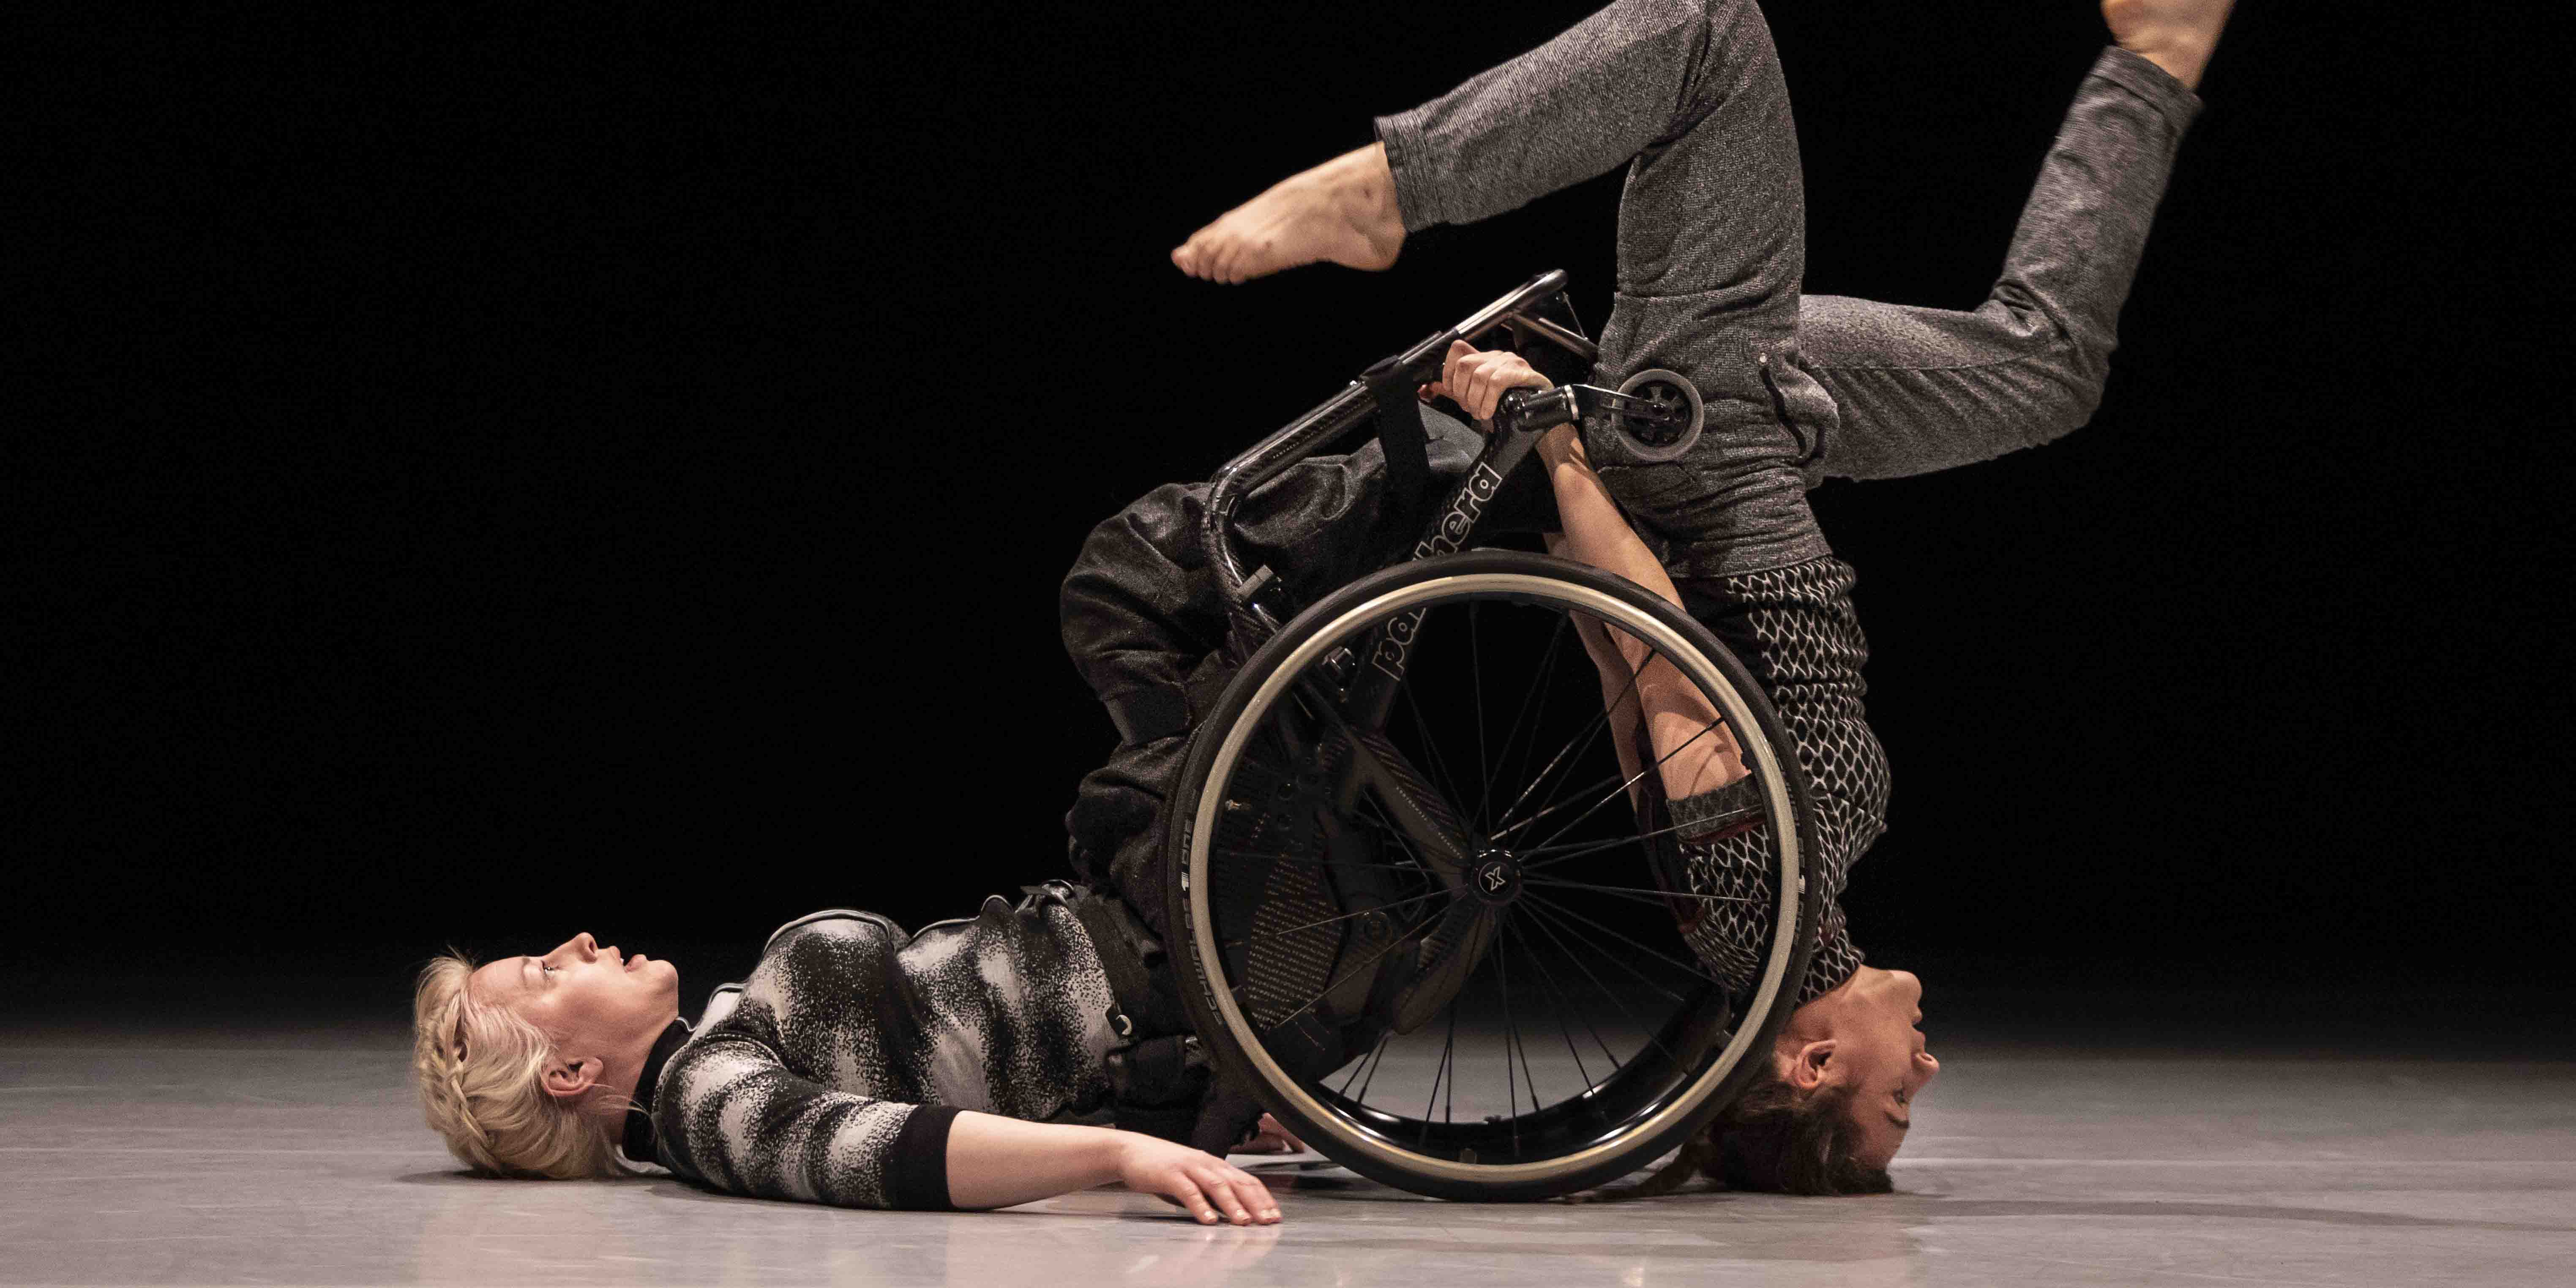 The image depicts two dancers in profile against a black background. The dancer on the left lies on her back with her legs up on a wheelchair that has tipped over. The dancer on the right stands on her head with spread legs, while holding onto the wheelchair with her hands. Photo: Tilo Stengel